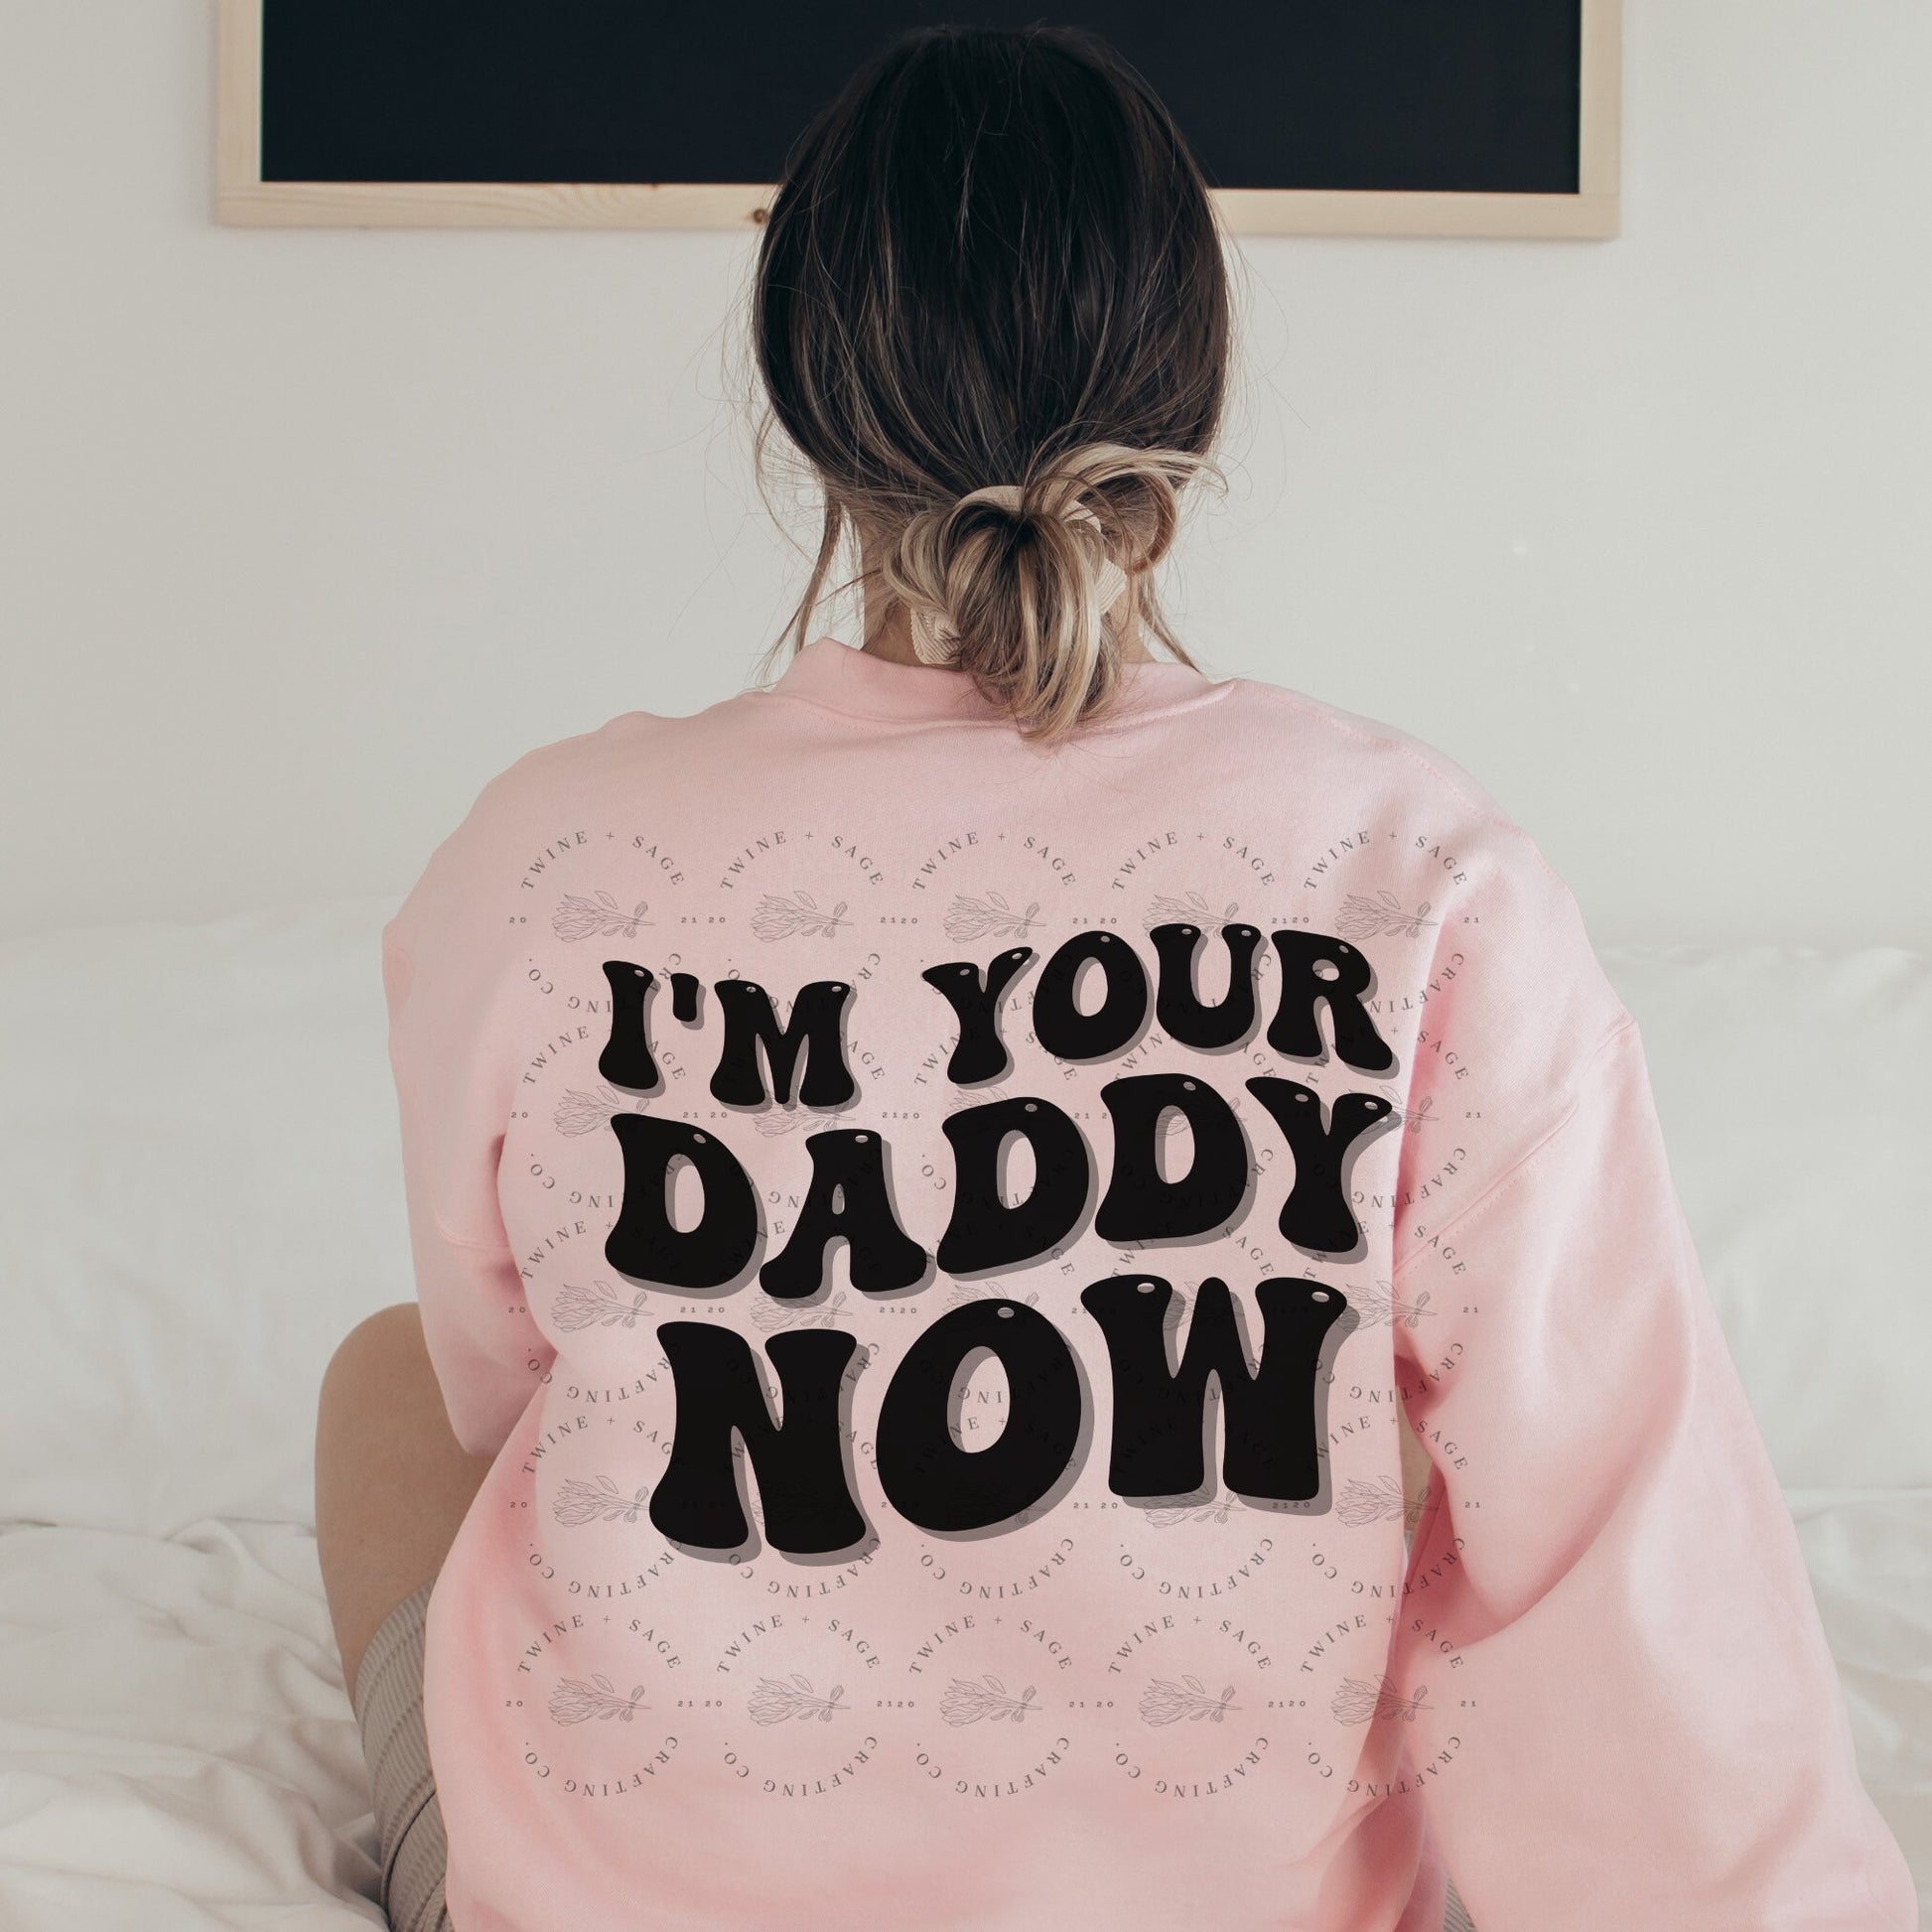 I’m Your Daddy Now Sweatshirt, Daddy Vibes, Daddy Energy, Boss Energy